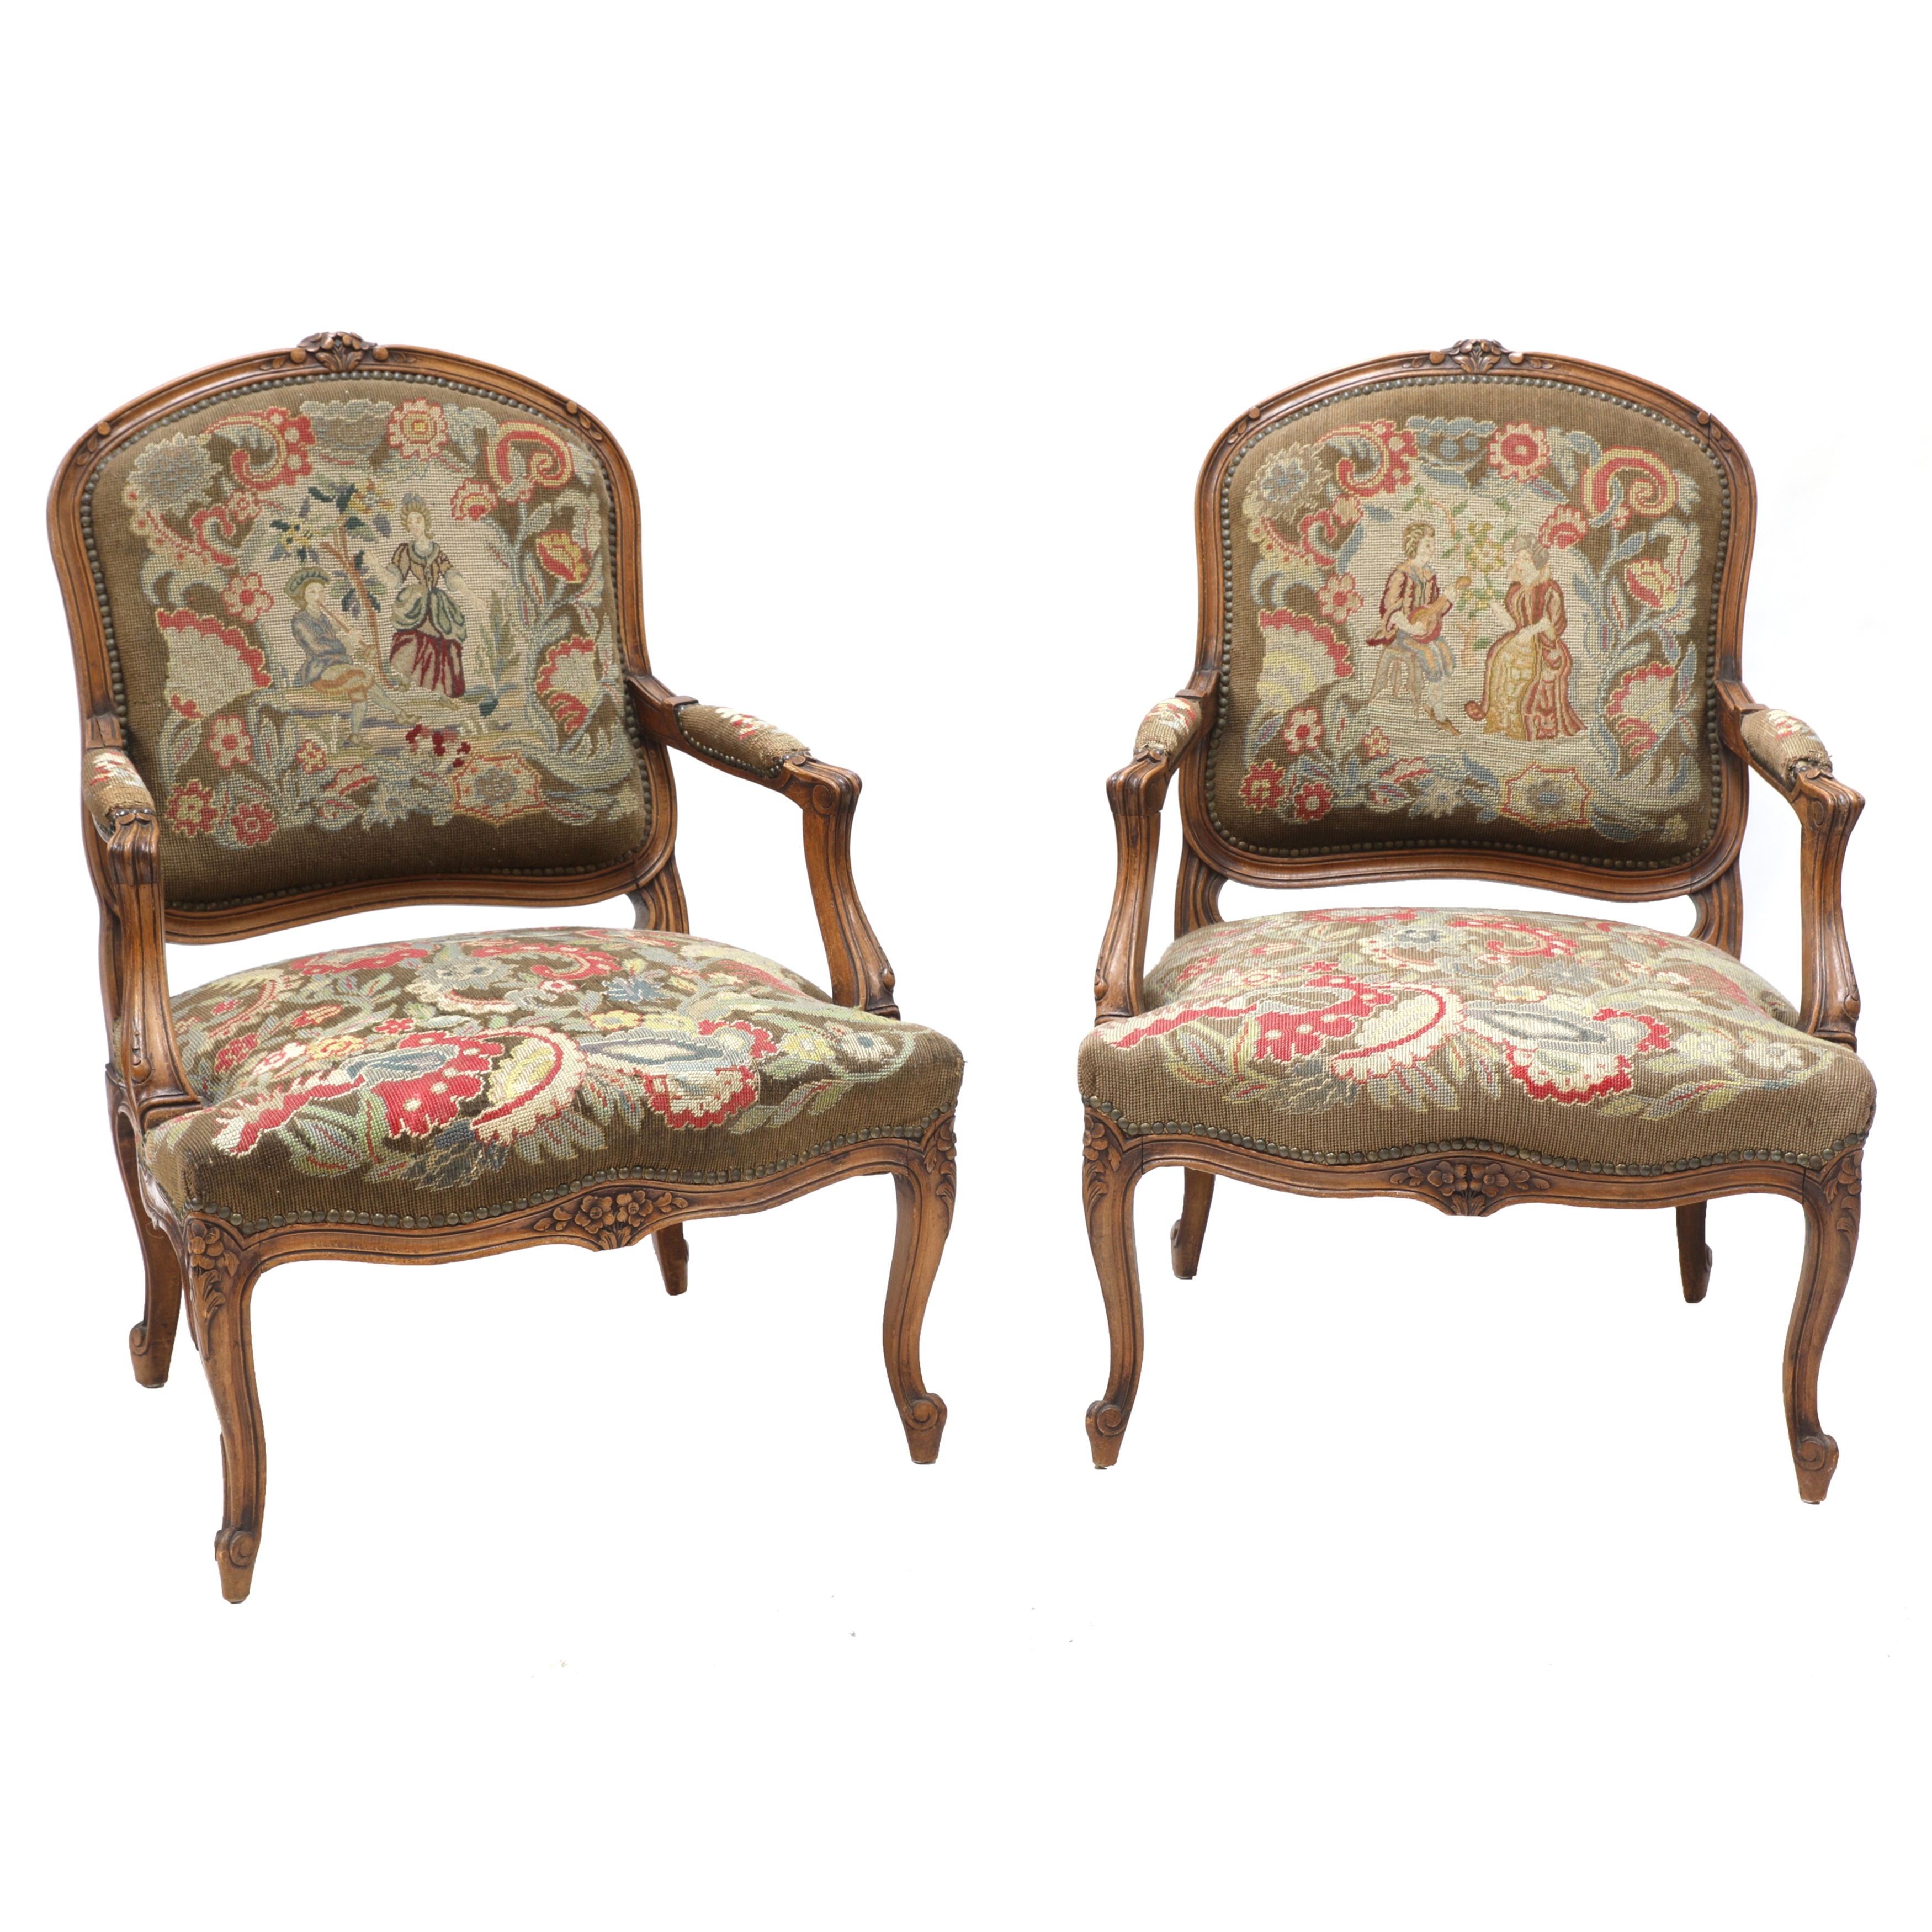 A pair of French Louis XV-style beech fauteuils, late 19th century